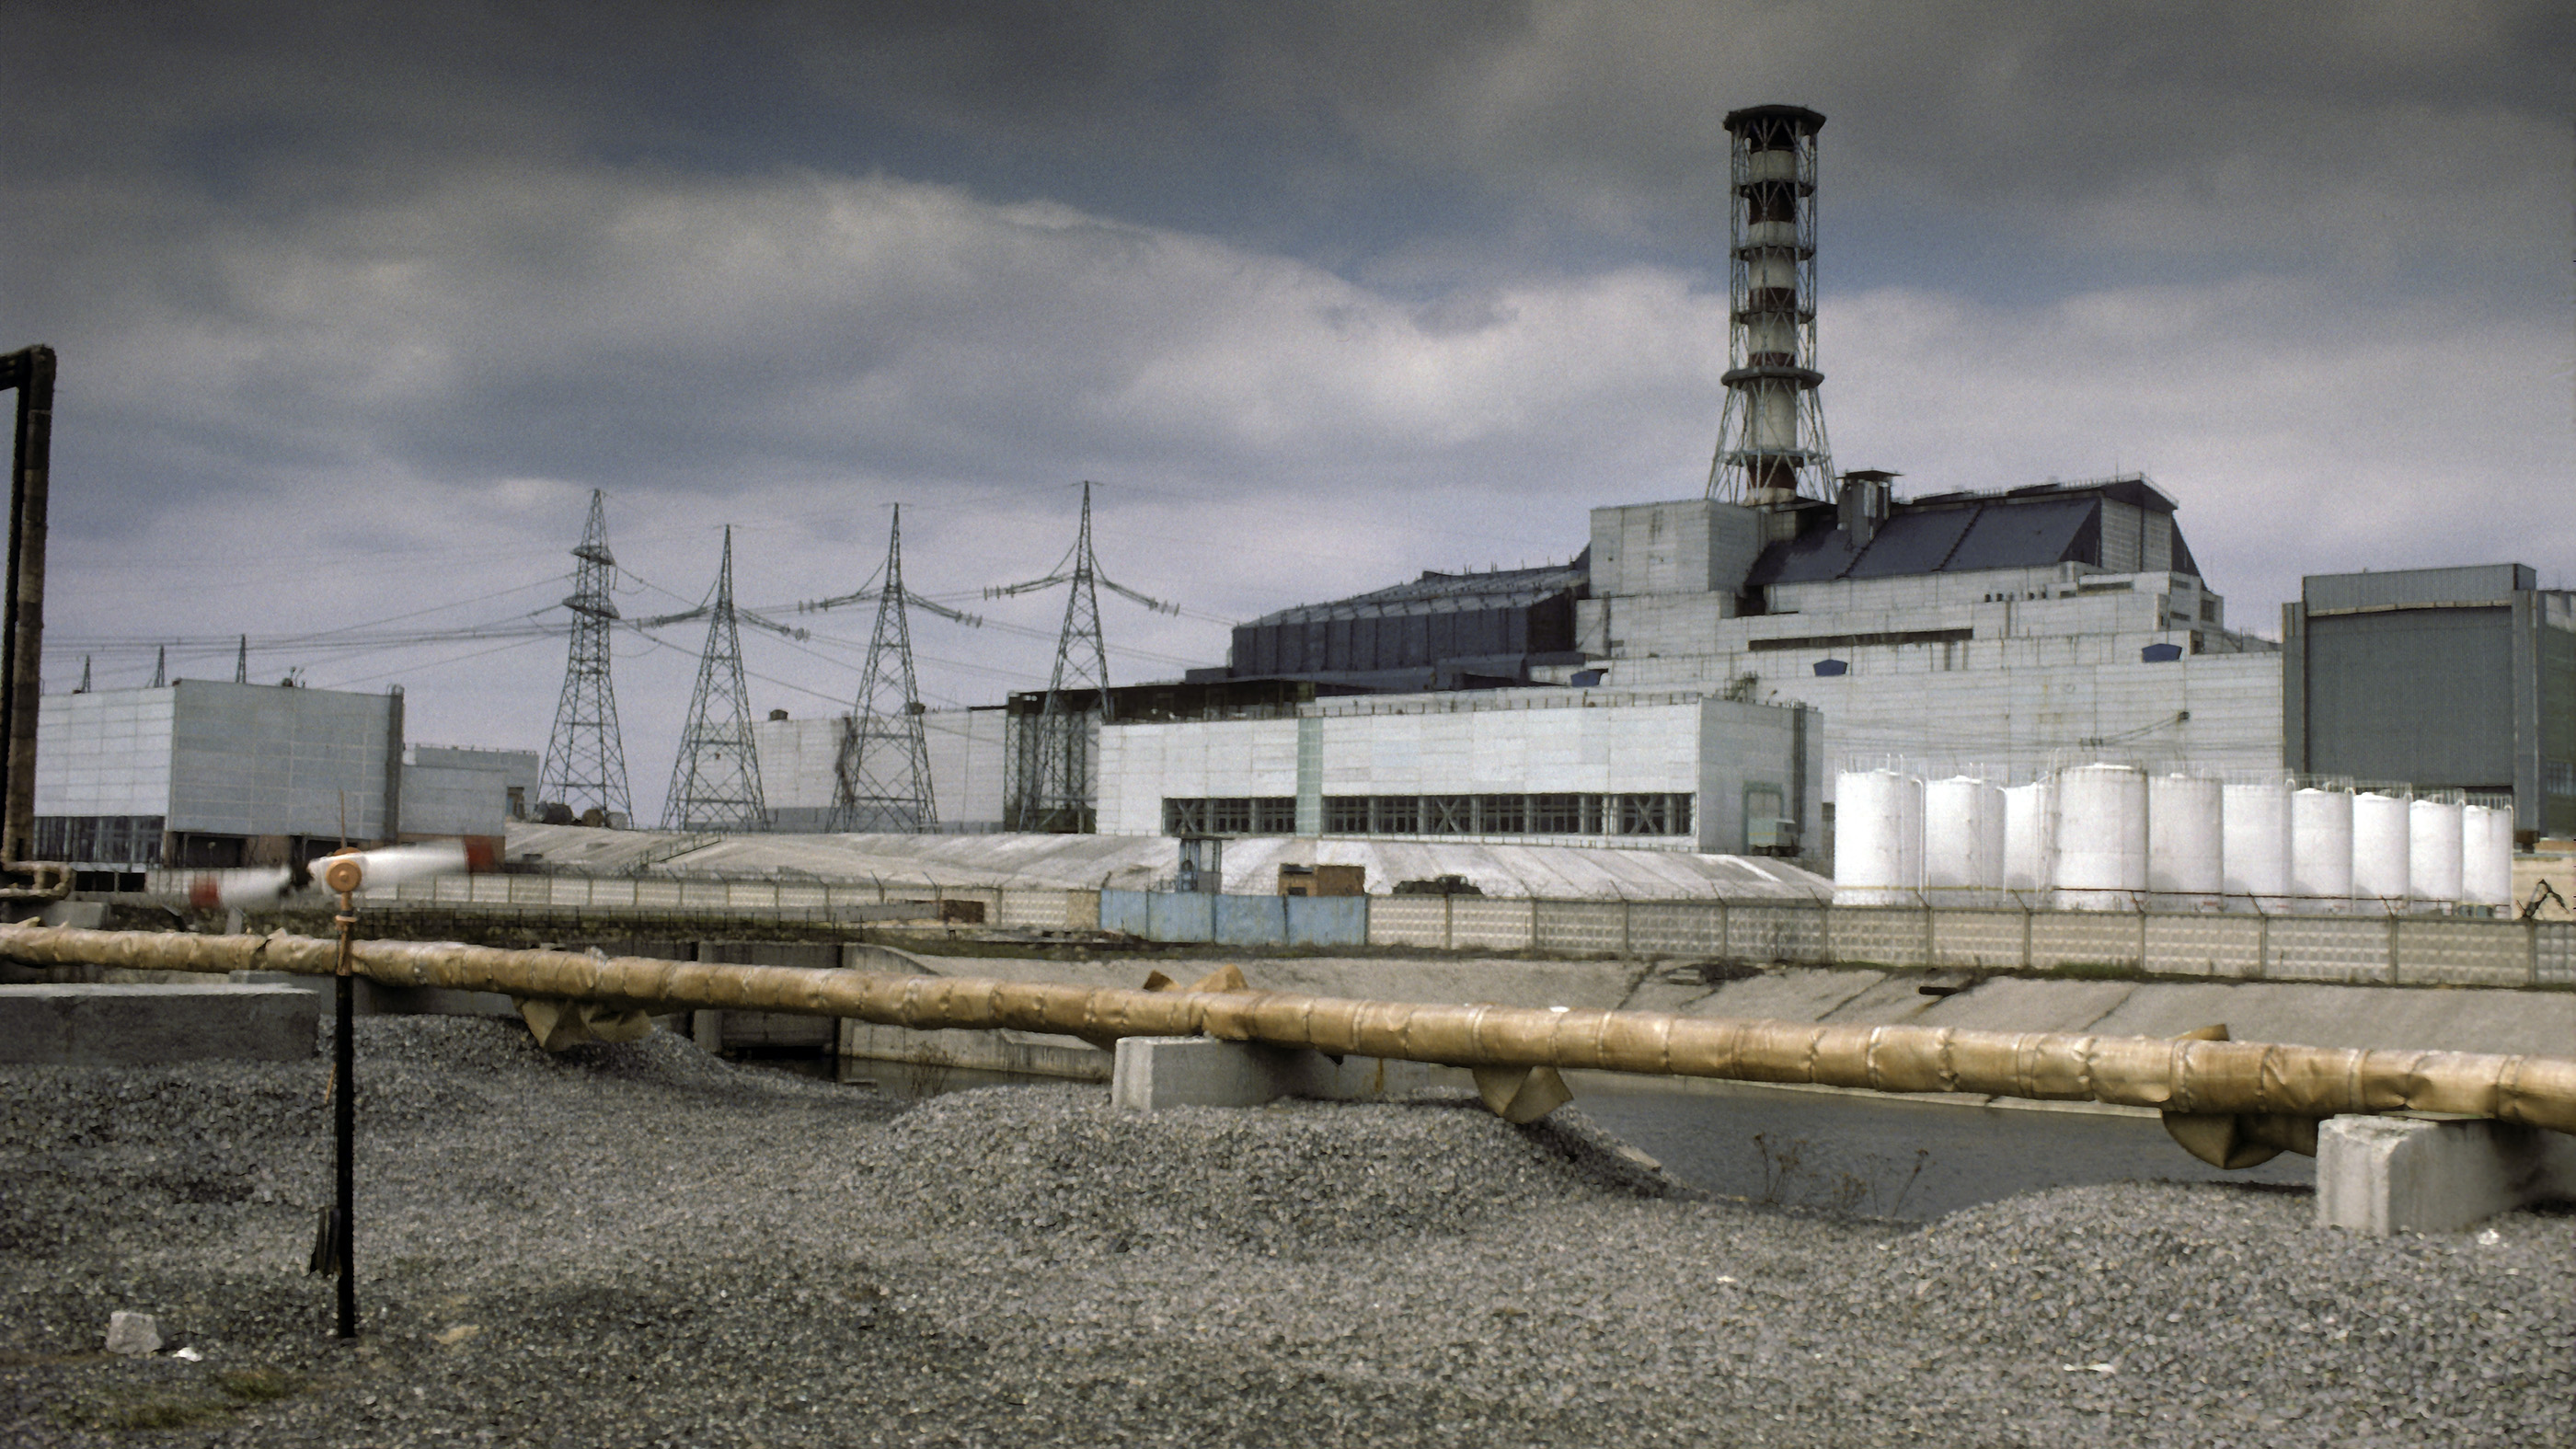 The damaged Chernobyl nuclear reactor, site of one of the worst nuclear accidents in history, in April, 1986